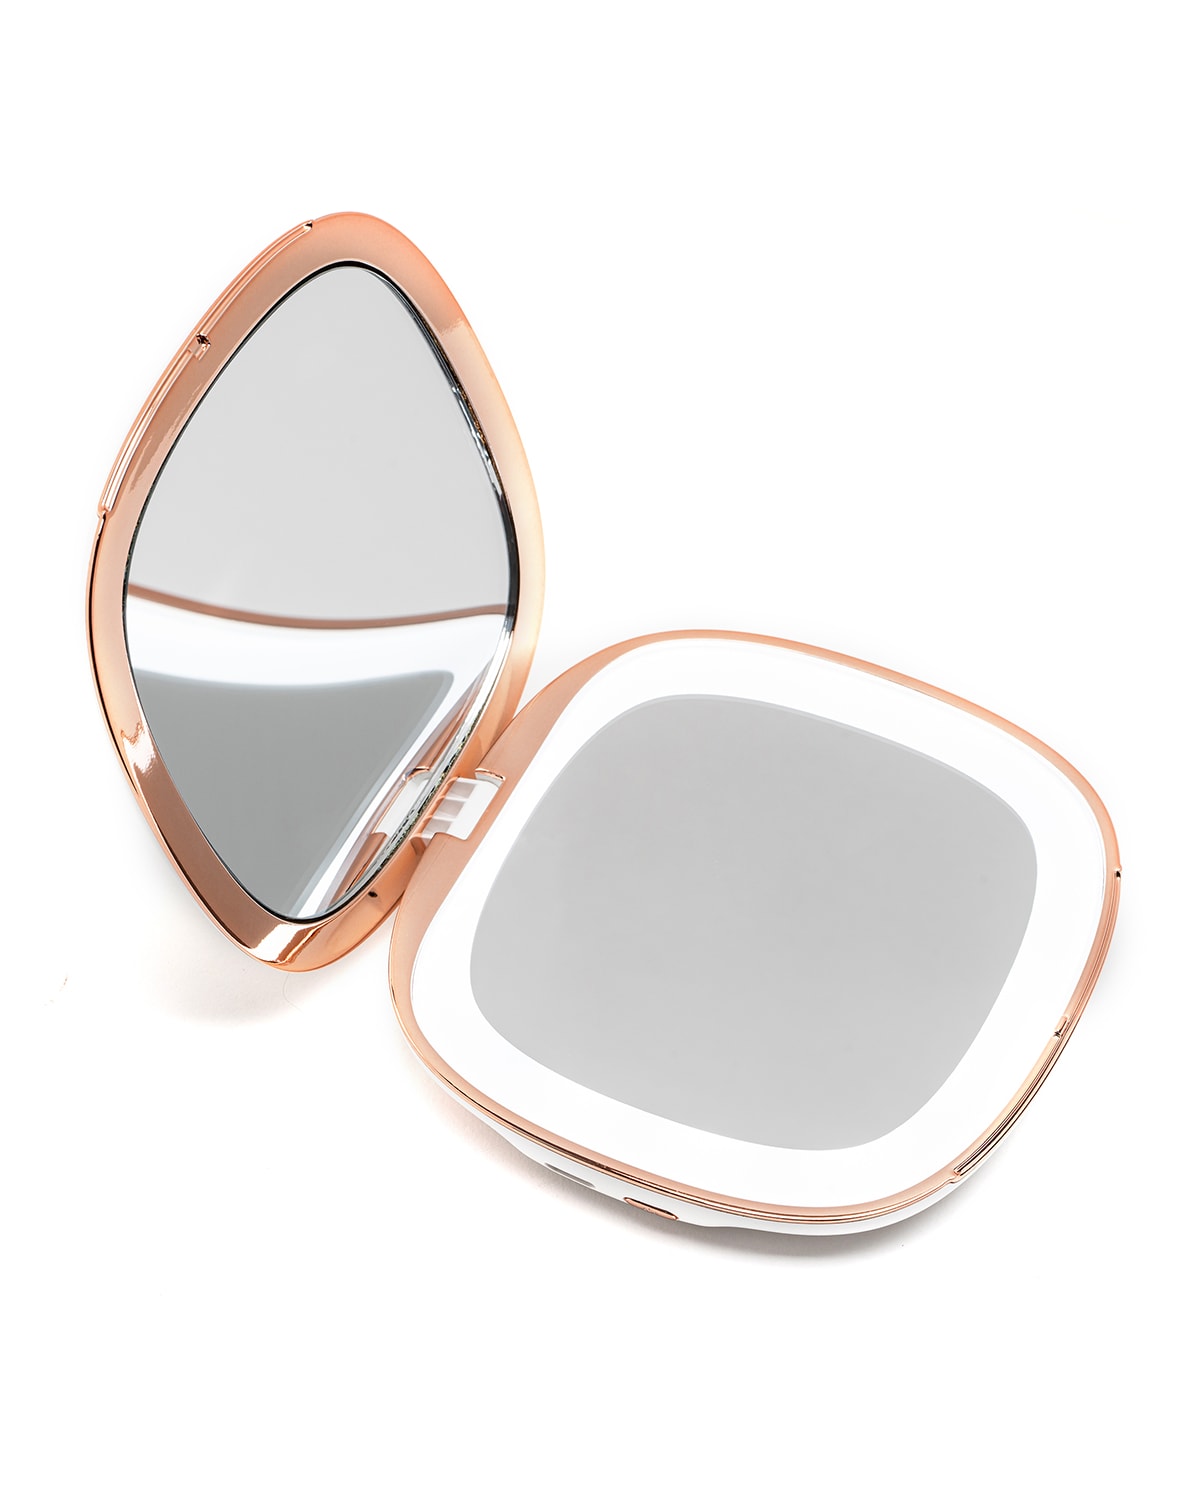 Fancii Cami 4-in-1 Lighted Vanity Mirror In Pink